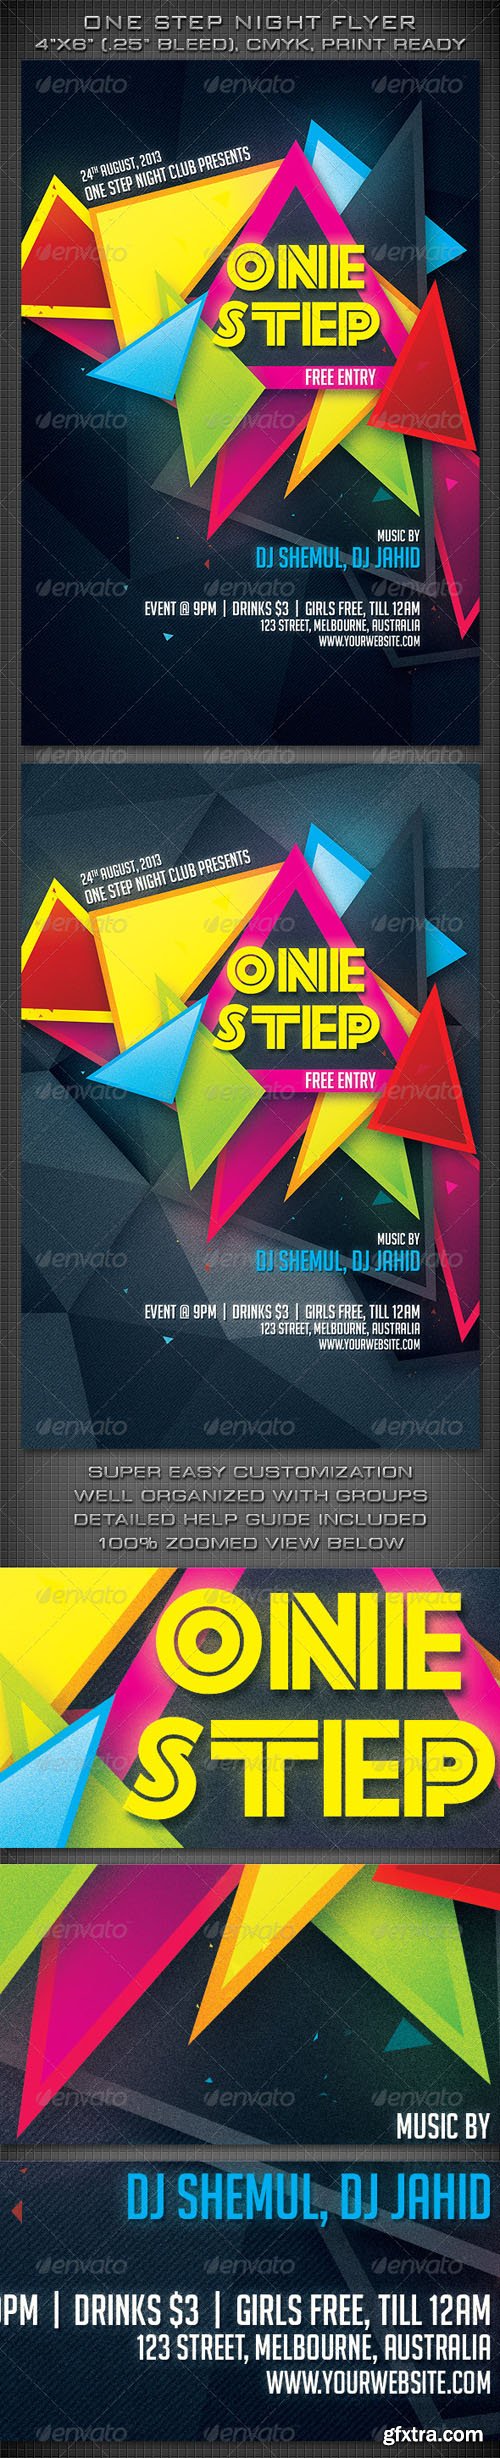 GR - One Step Night Party Flyer 5714210